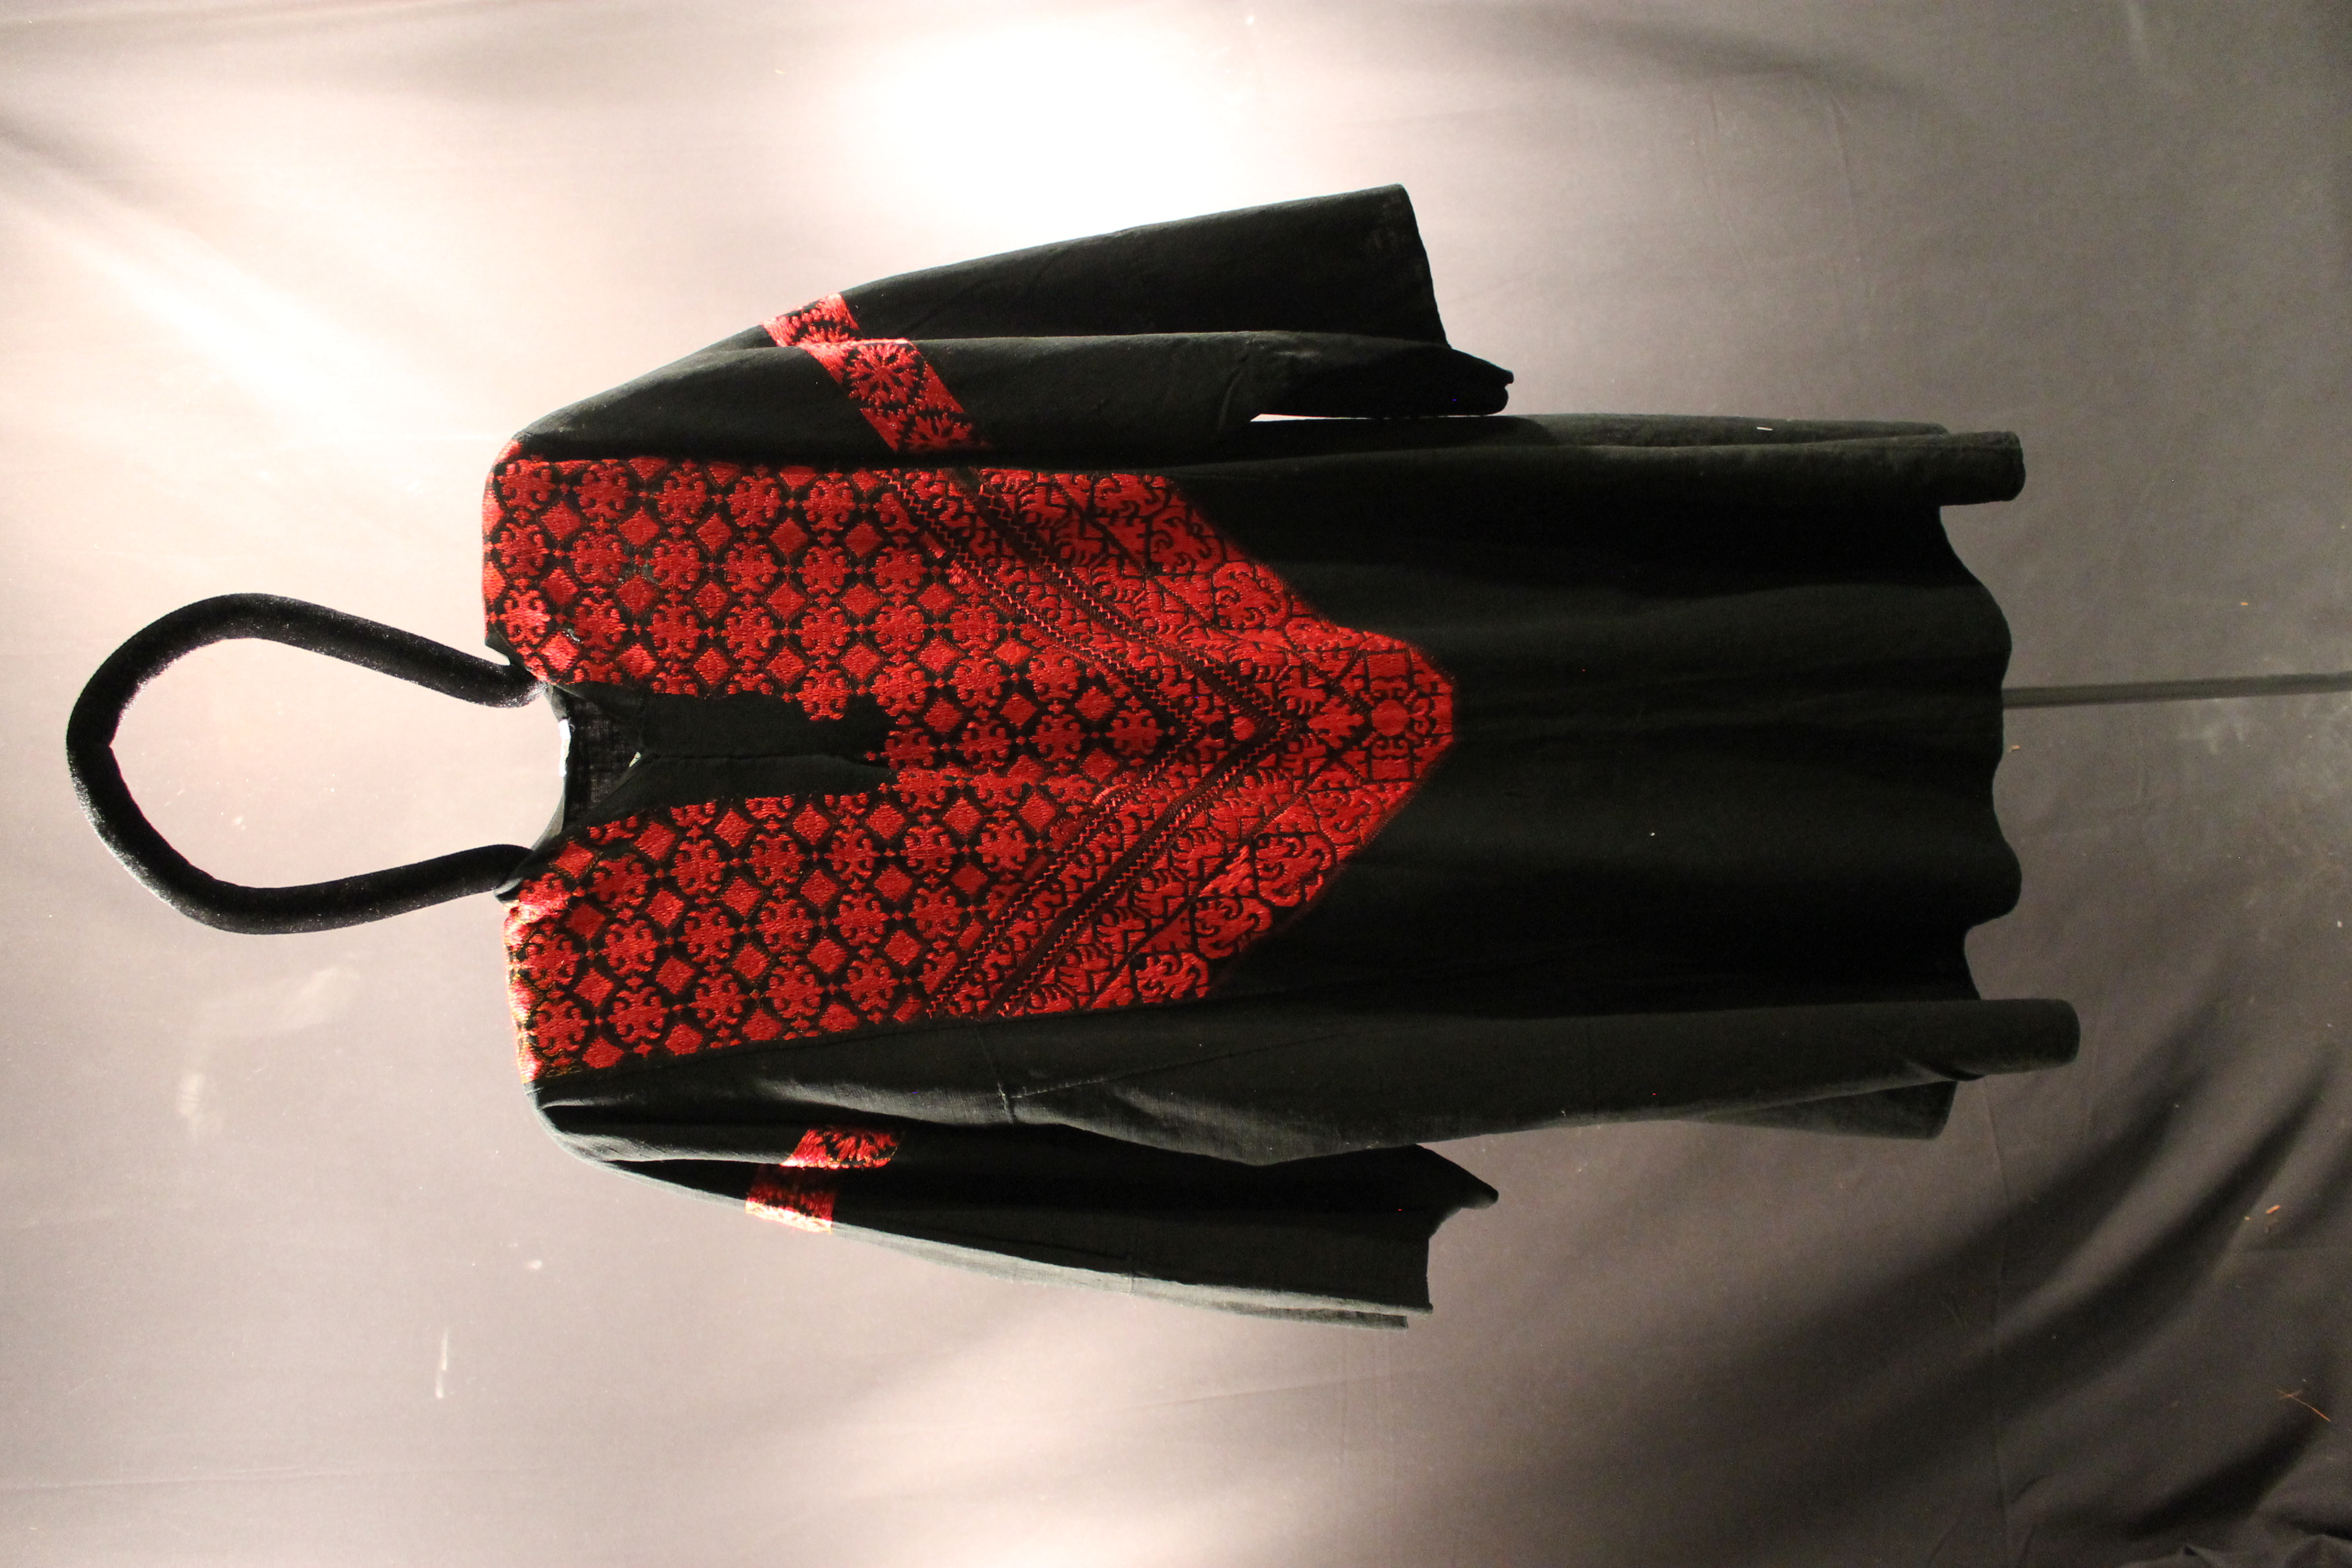 Black tunic with red embroidery of squares and flower-like shapes on the front. 